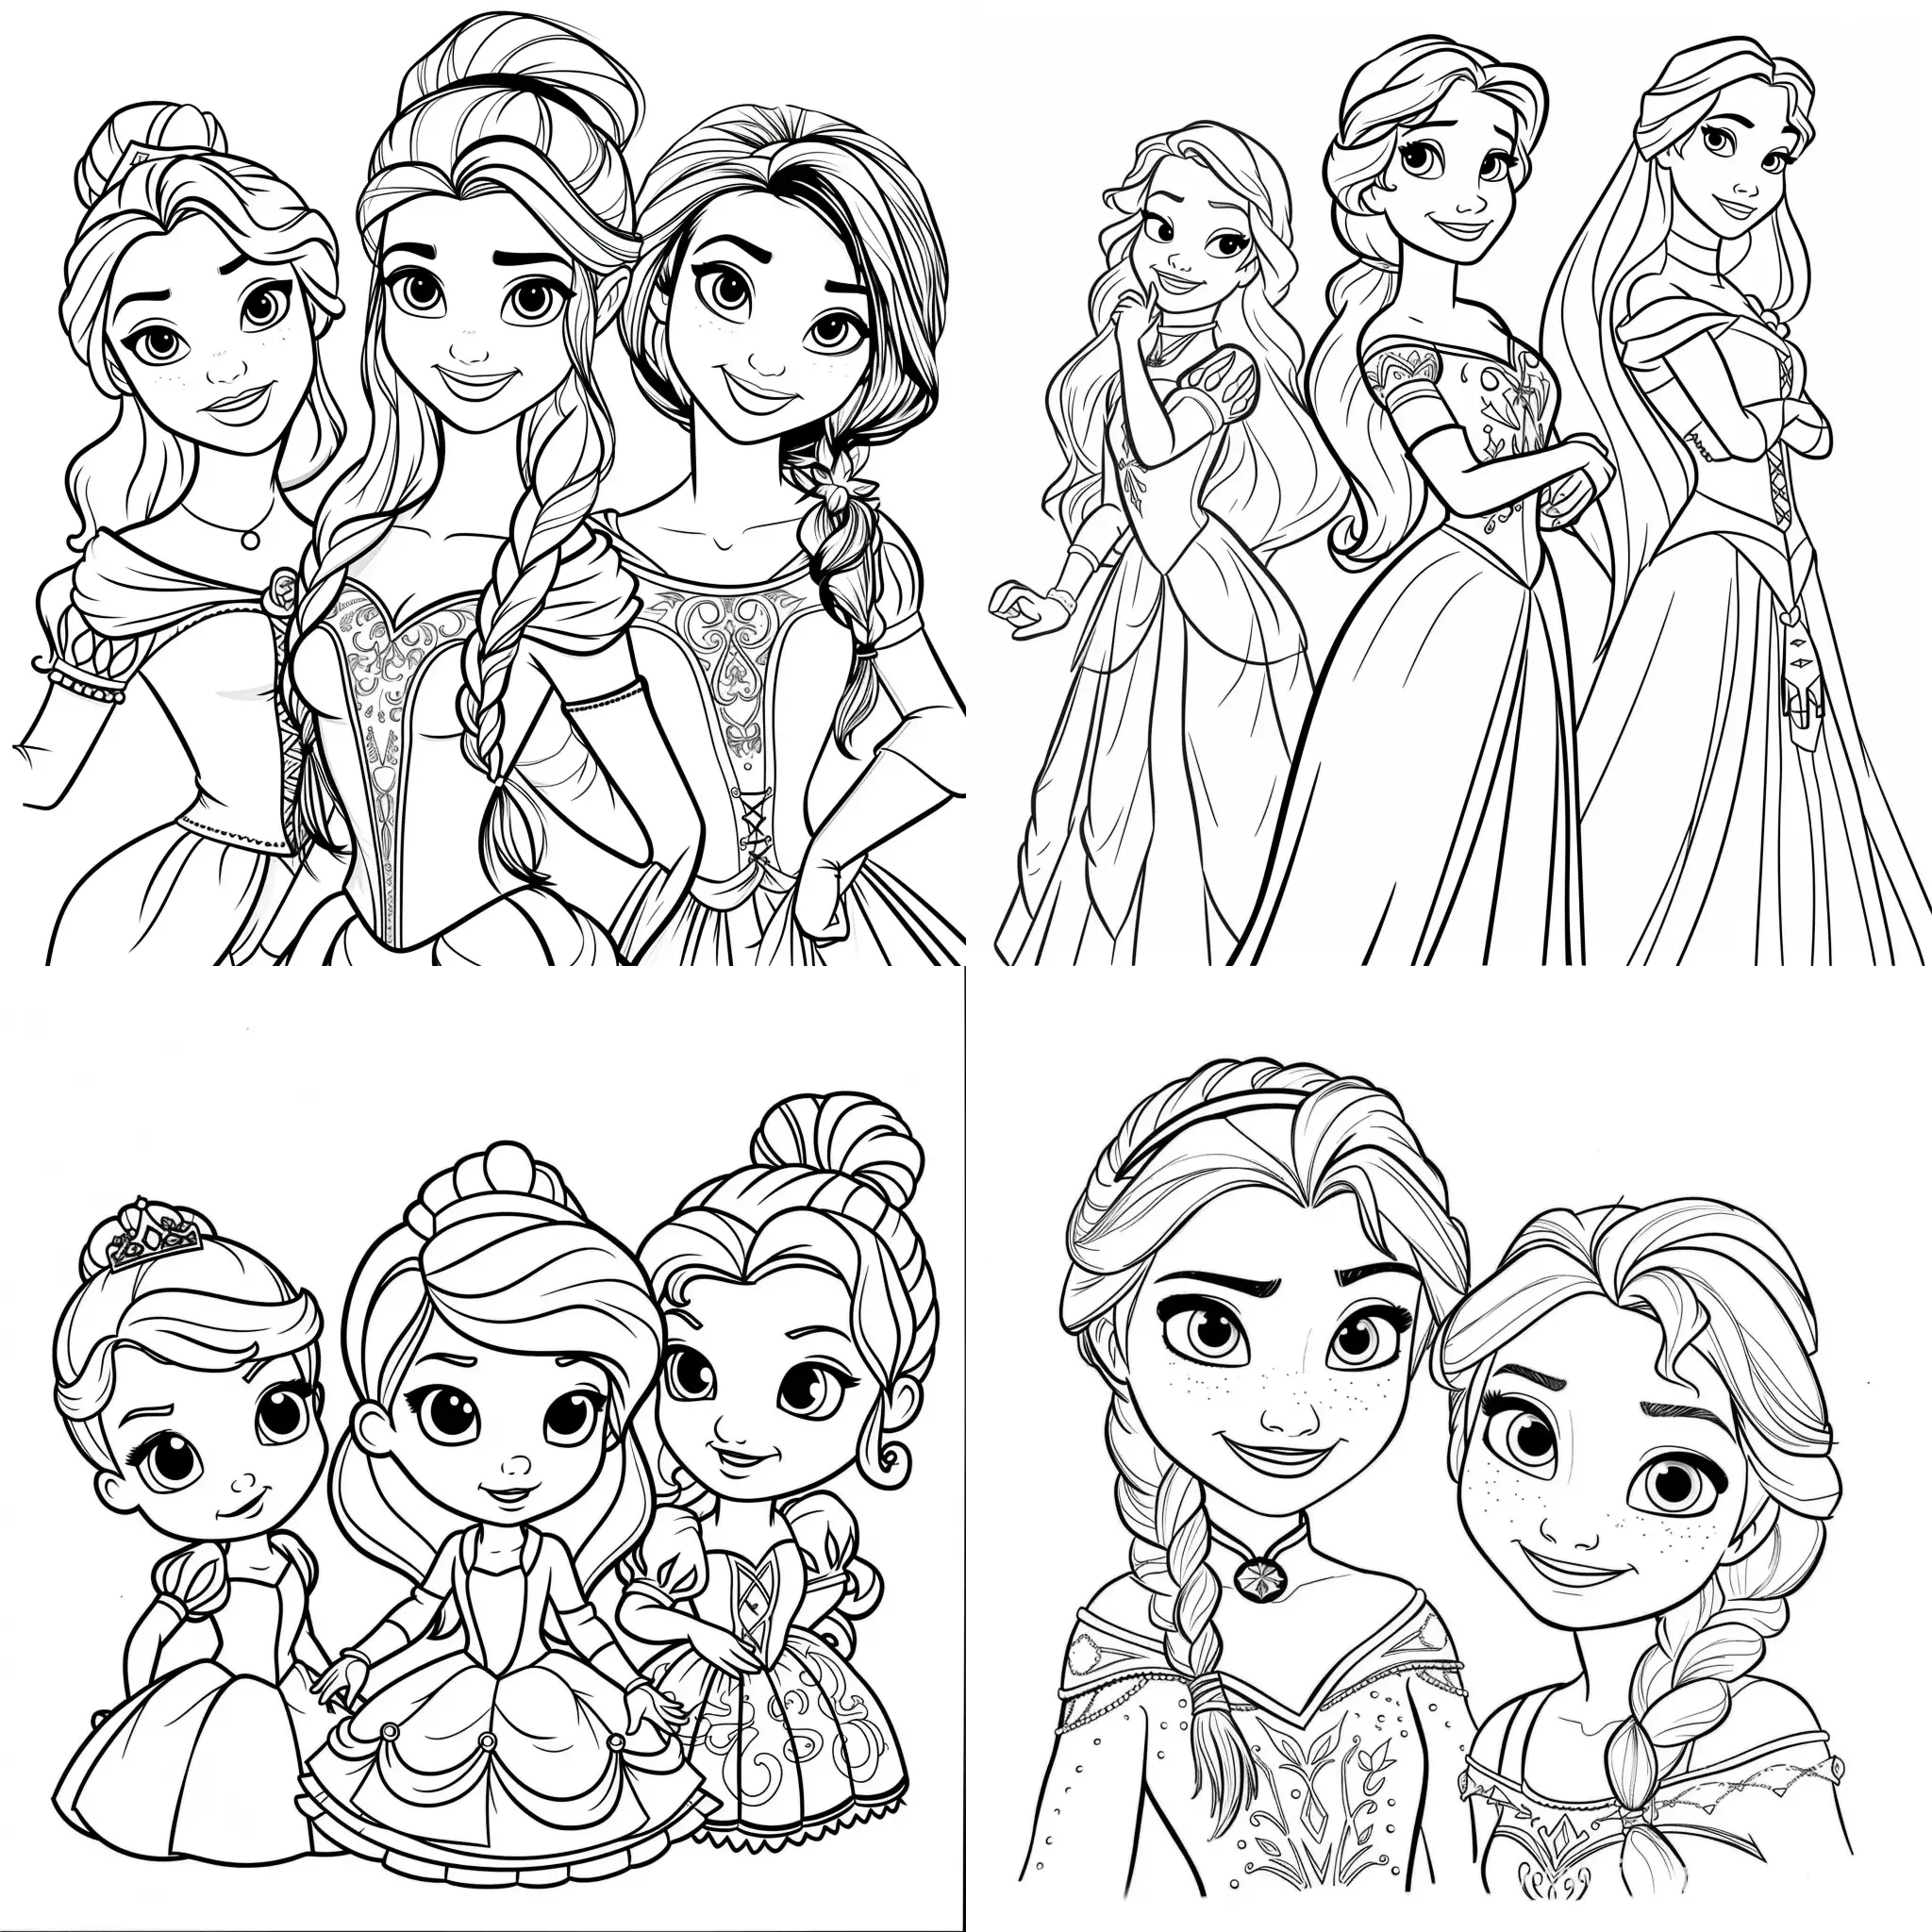 black and white outline art for kids disney and pixar princess for book page Coloring pages for kids, full white, kids style, white background, full body, Sketch style, (((((white background))))), use just outline, cartoon style, line art, coloring